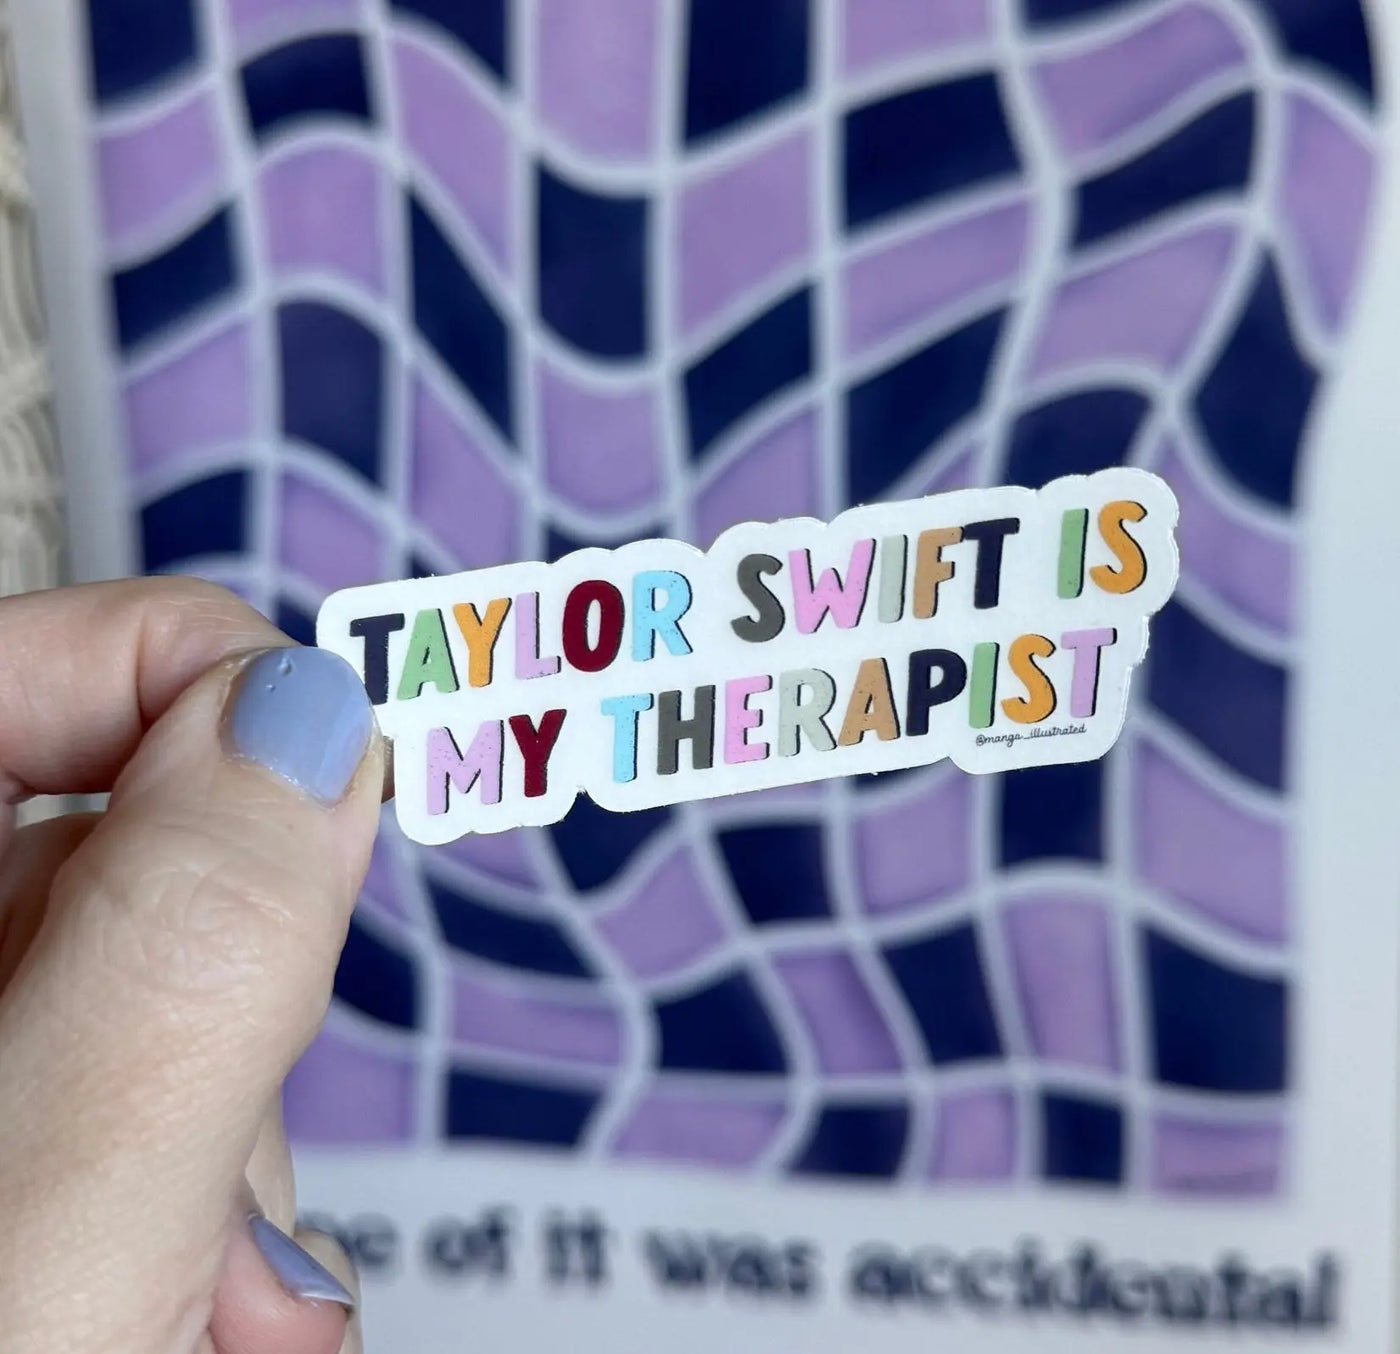 CLEAR Taylor Swift is my therapist sticker MangoIllustrated